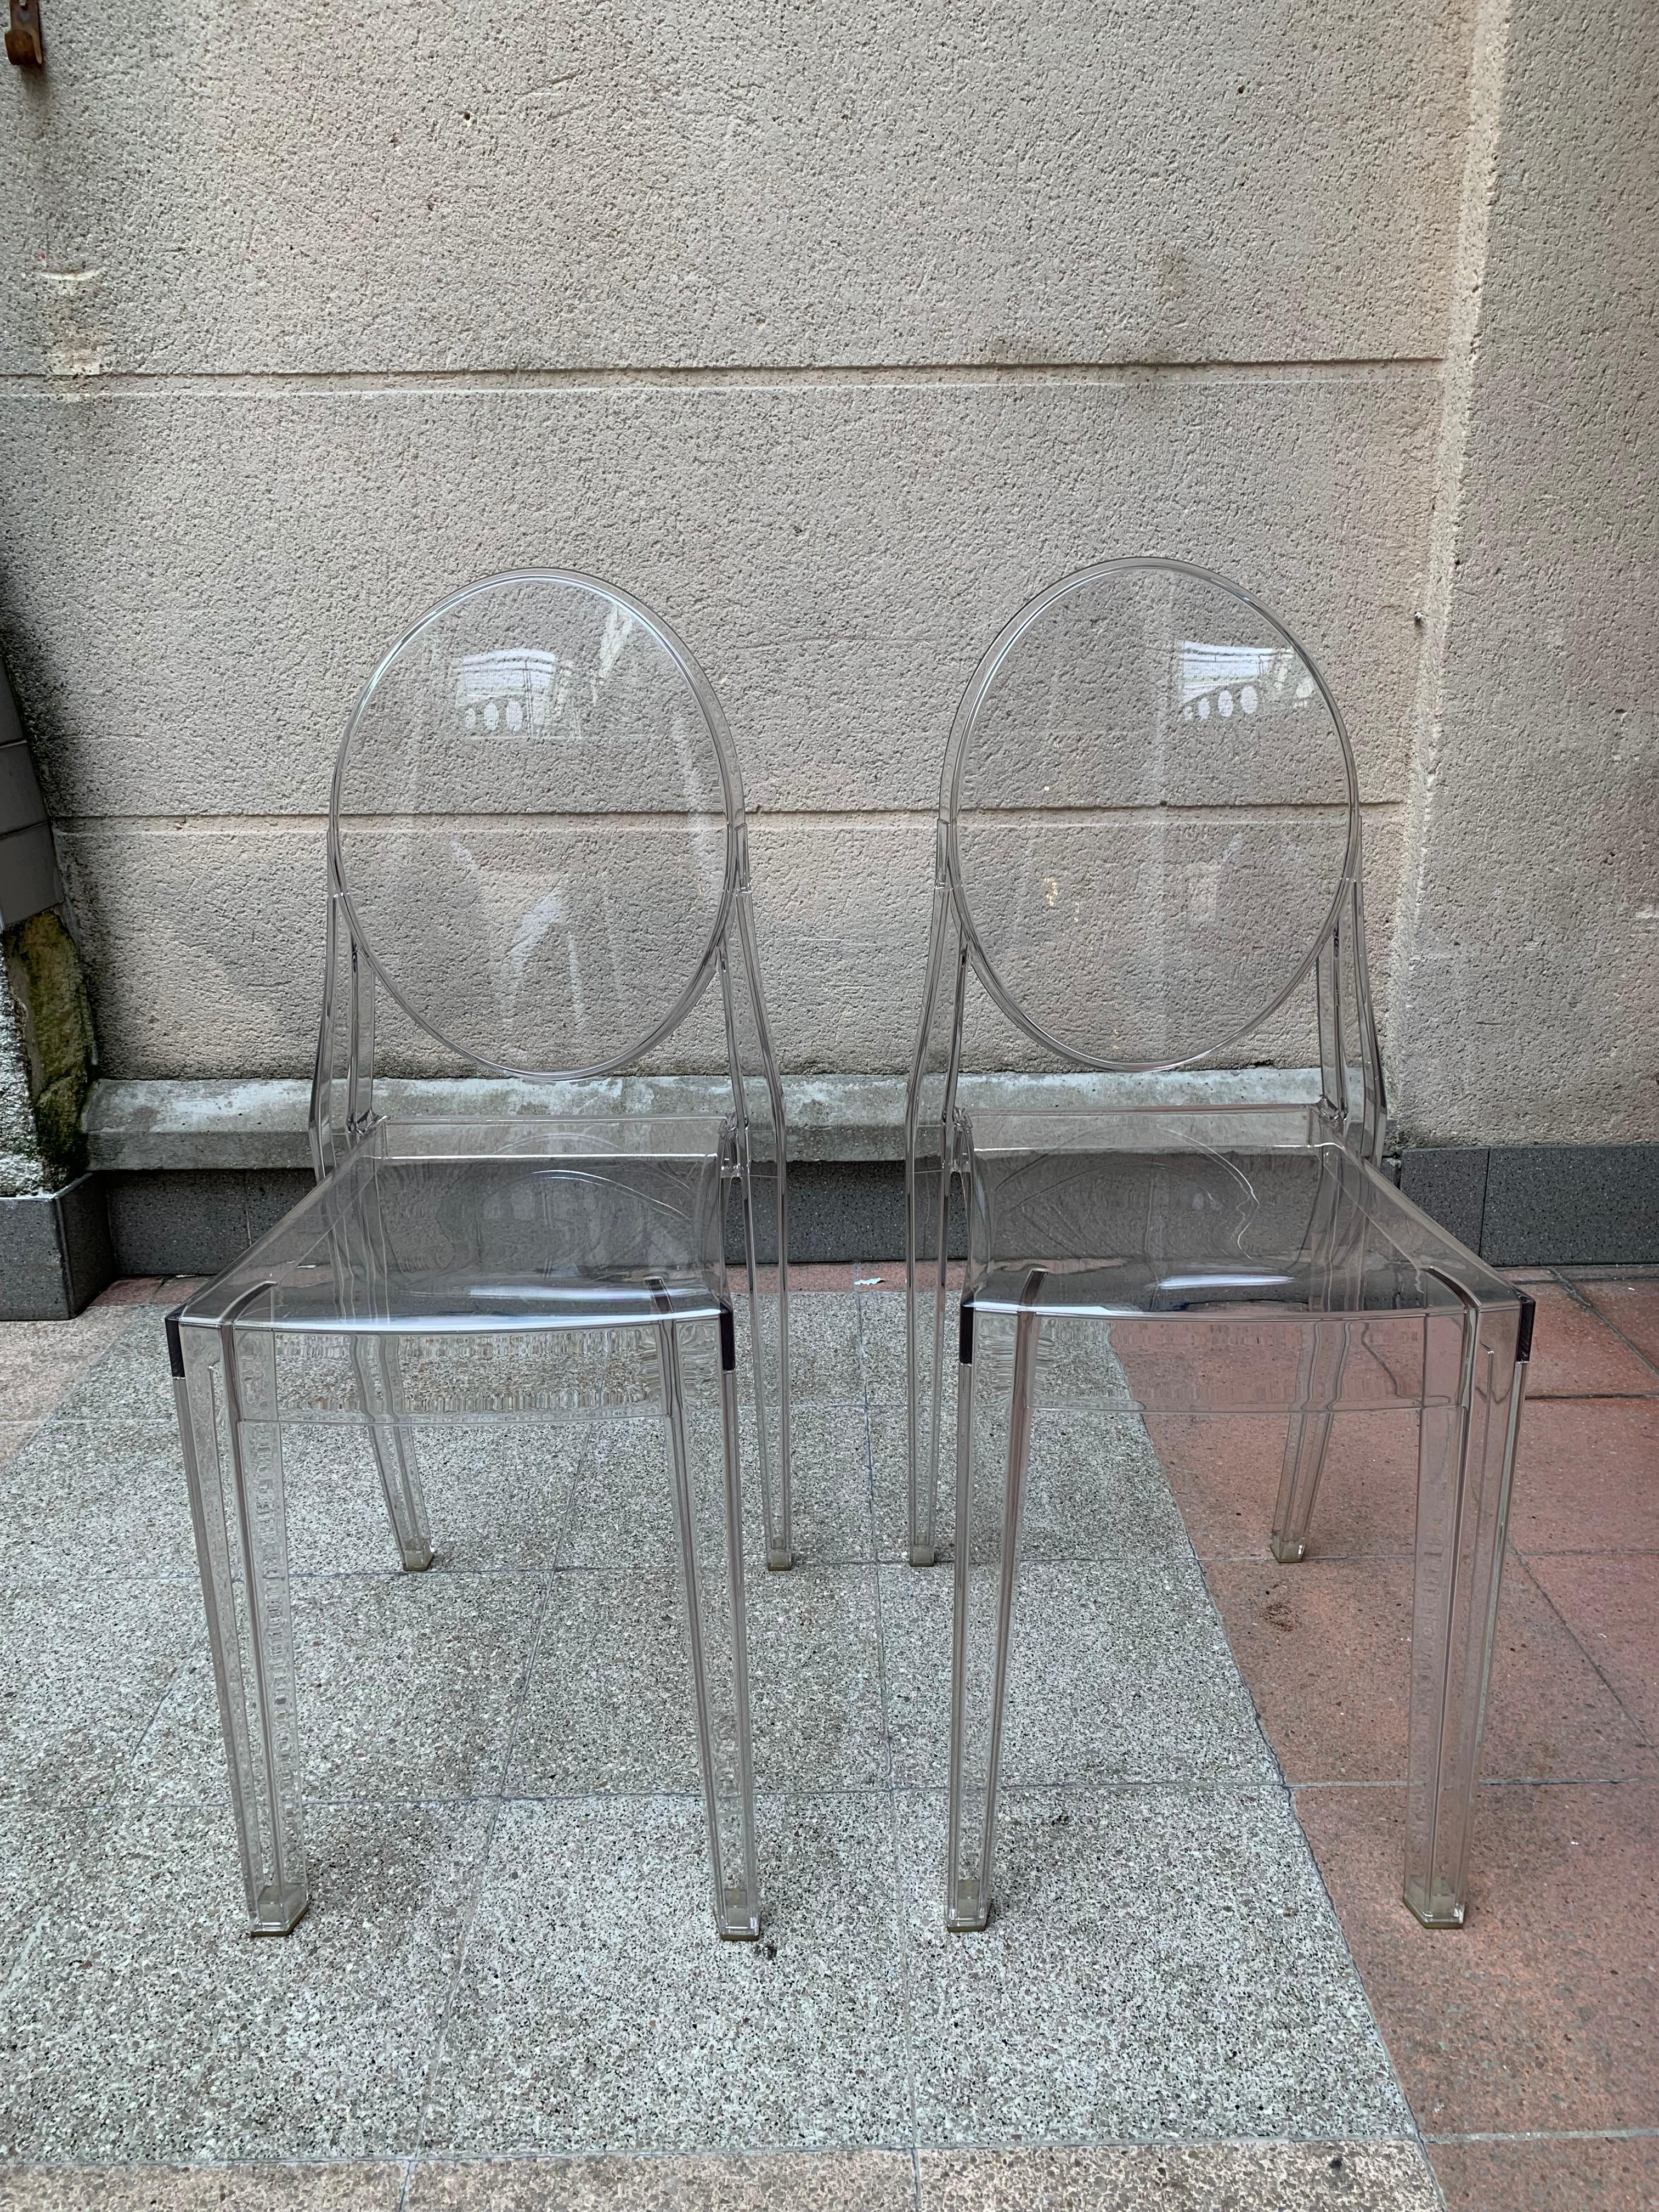 Victoria Ghost chair designed by Philippe Stark for Kartell 

Kartell Edition 
In transparent polycarbonate 
Circa 2005

Dimensions: 
Height : 89cm
Width : 38cm
Depth : 52 cm
Seat height : 46cm

One of the two chairs is slightly damaged